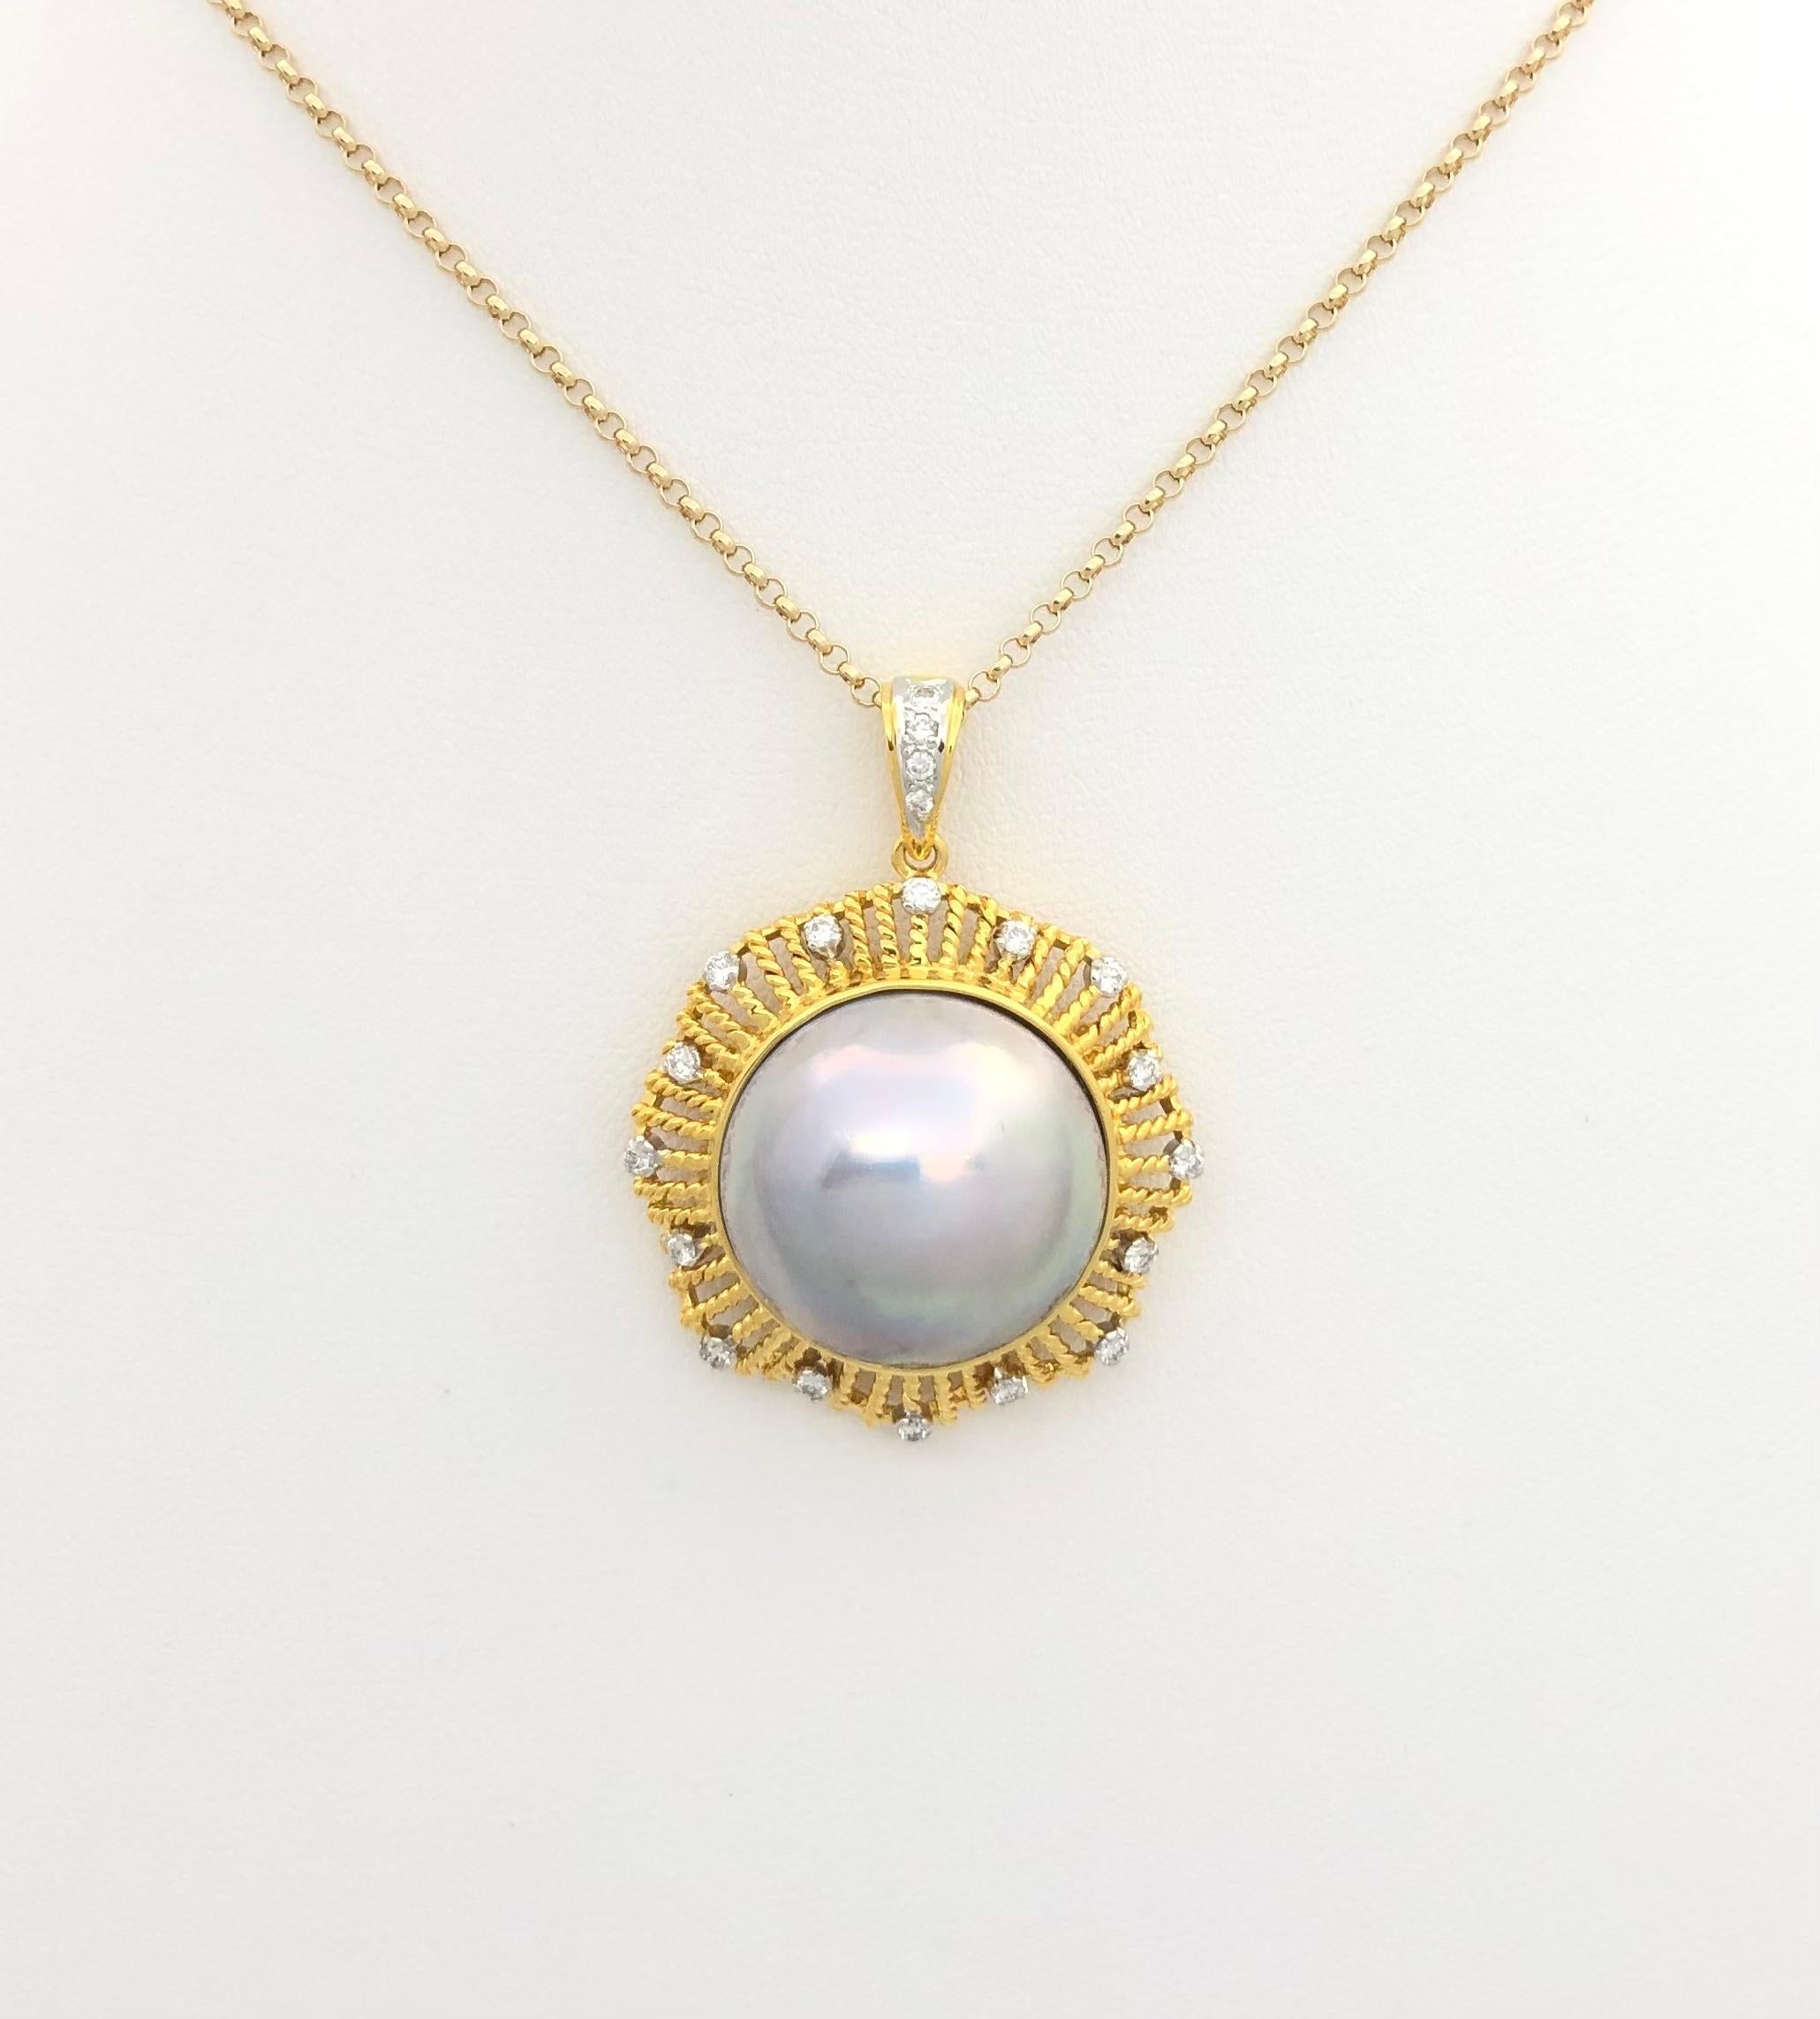 Mabe Pearl with Diamond 0.28 carat Pendant set in 18 Karat Gold Settings
(chain not included)

Width: 3.0 cm 
Length: 4.0 cm
Total Weight: 13.99  grams

